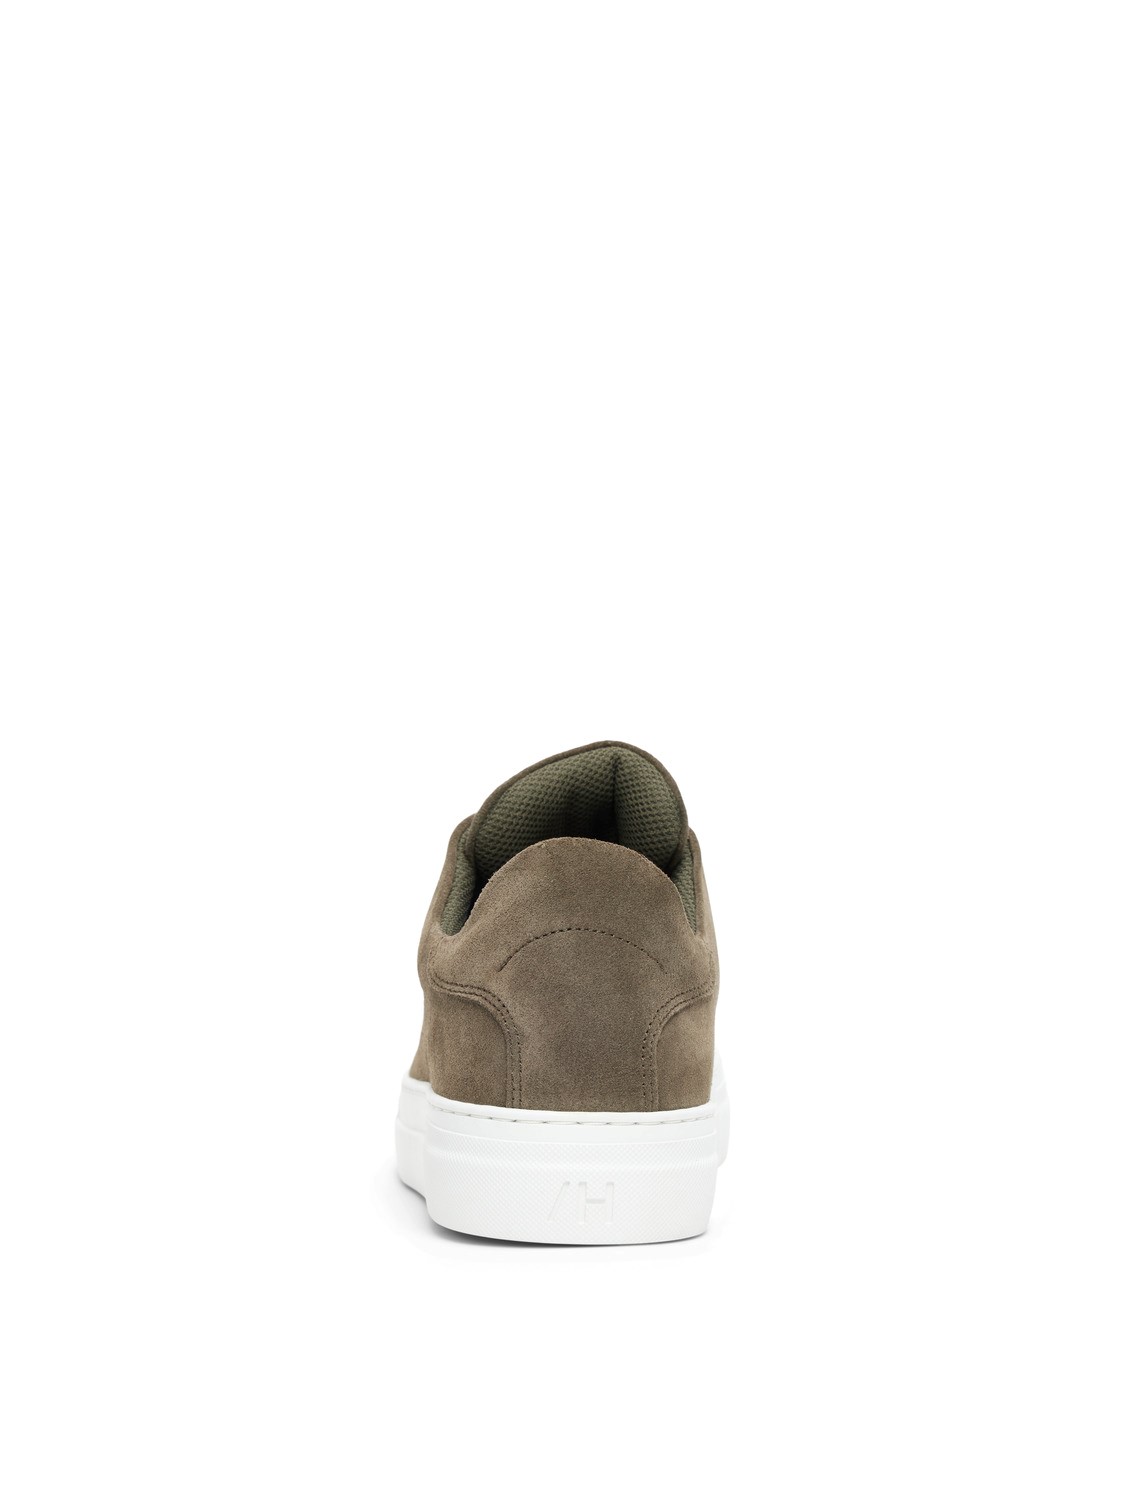 David Chunky Clean Suede Trainer